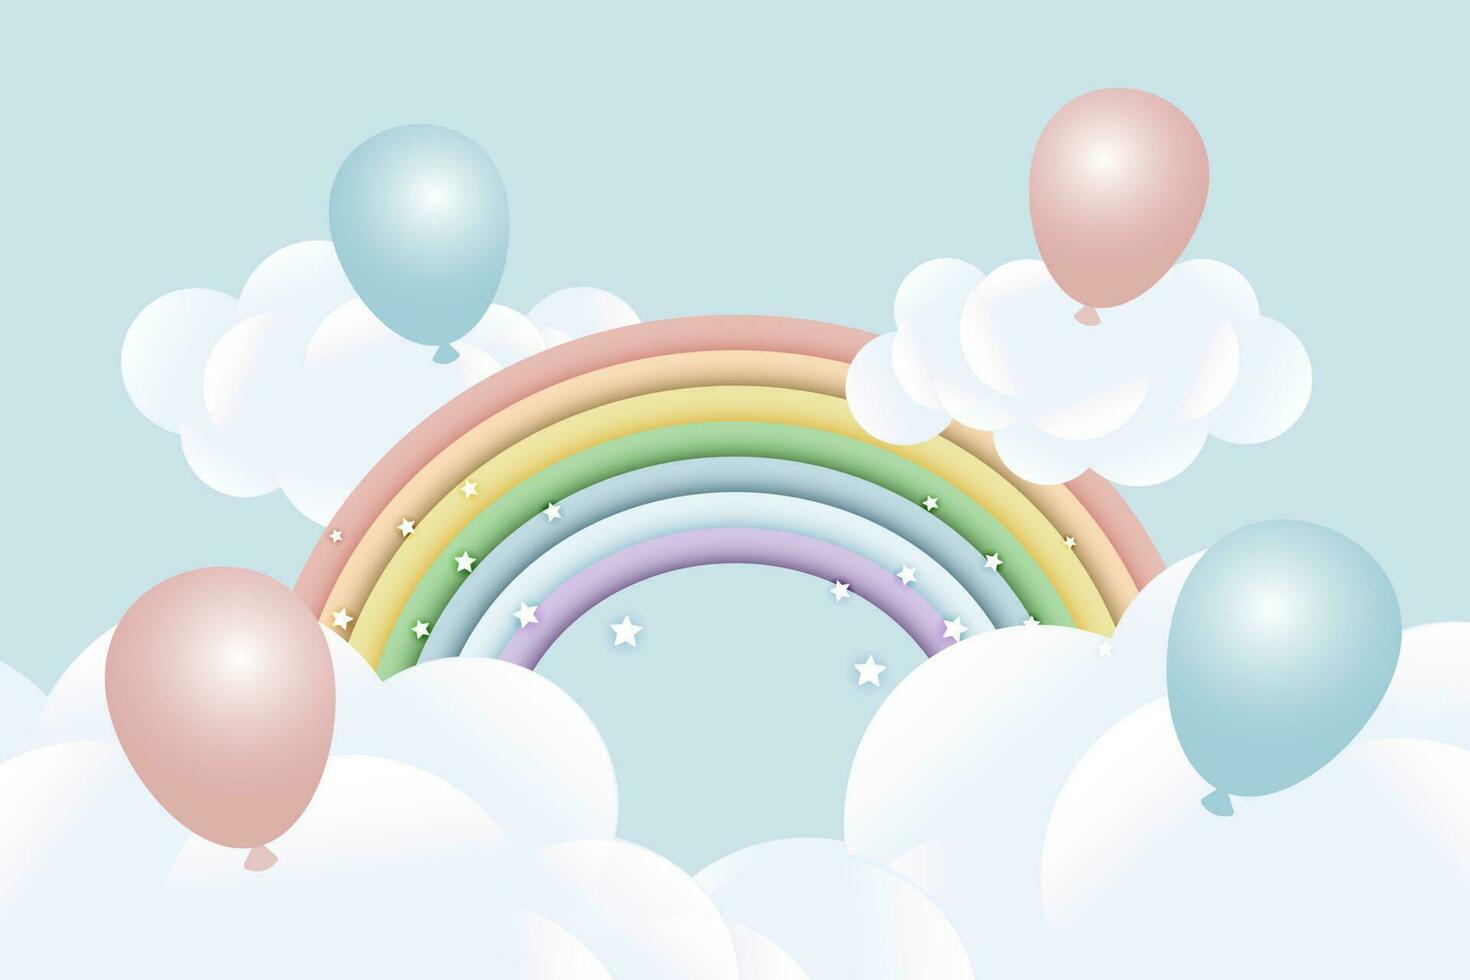 3d baby shower, rainbow with clouds and balloons on a pale blue background, childish design in pastel colors. Background, illustration, vector. vector